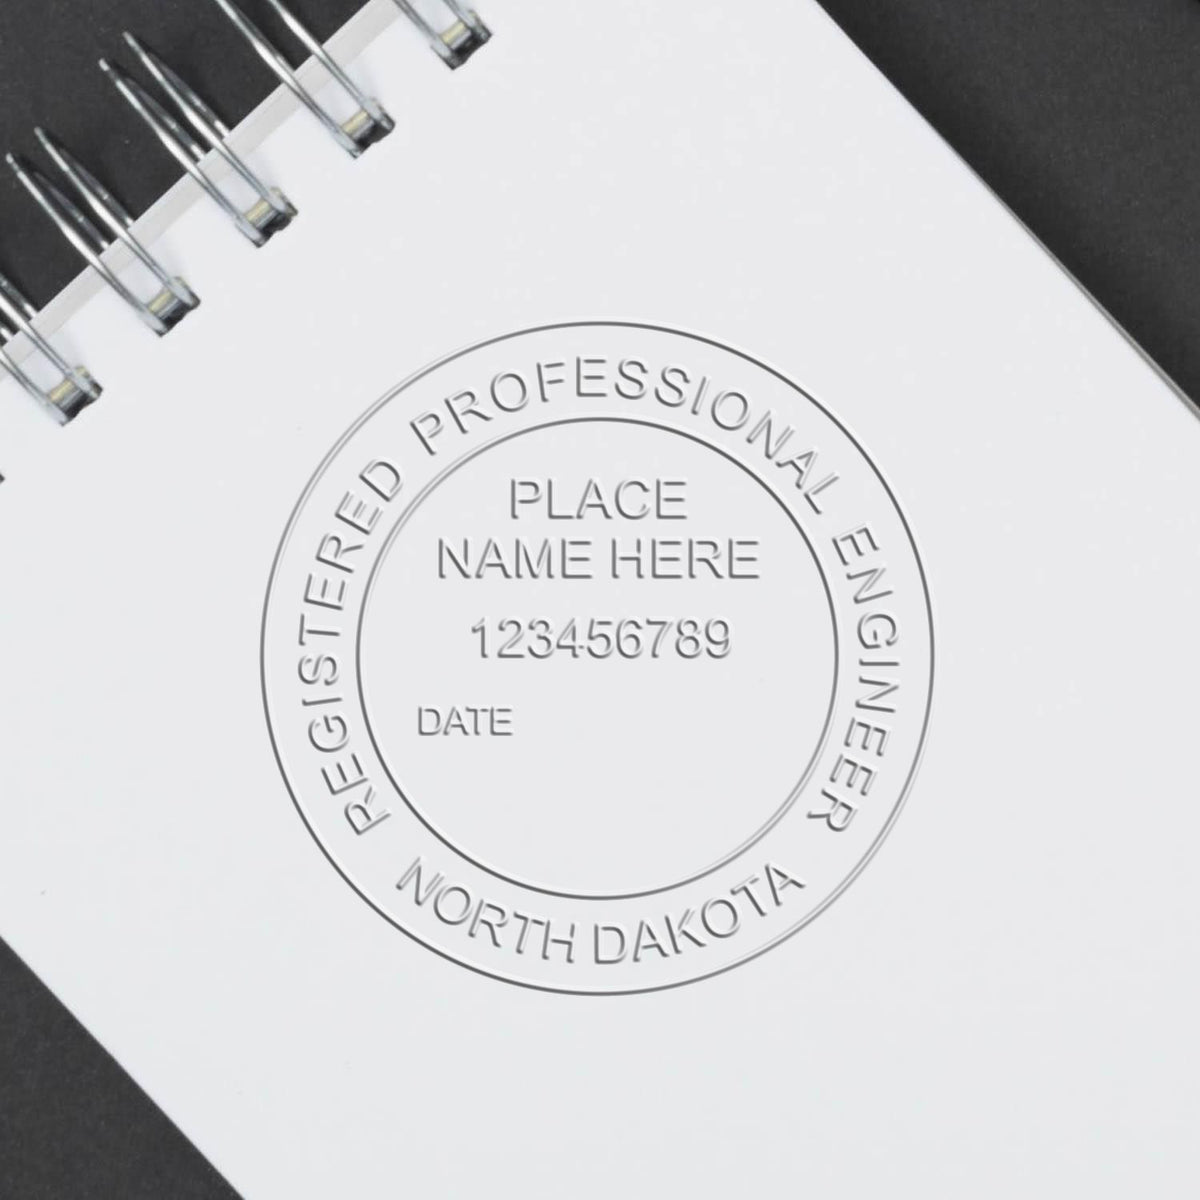 A stamped impression of the Soft North Dakota Professional Engineer Seal in this stylish lifestyle photo, setting the tone for a unique and personalized product.